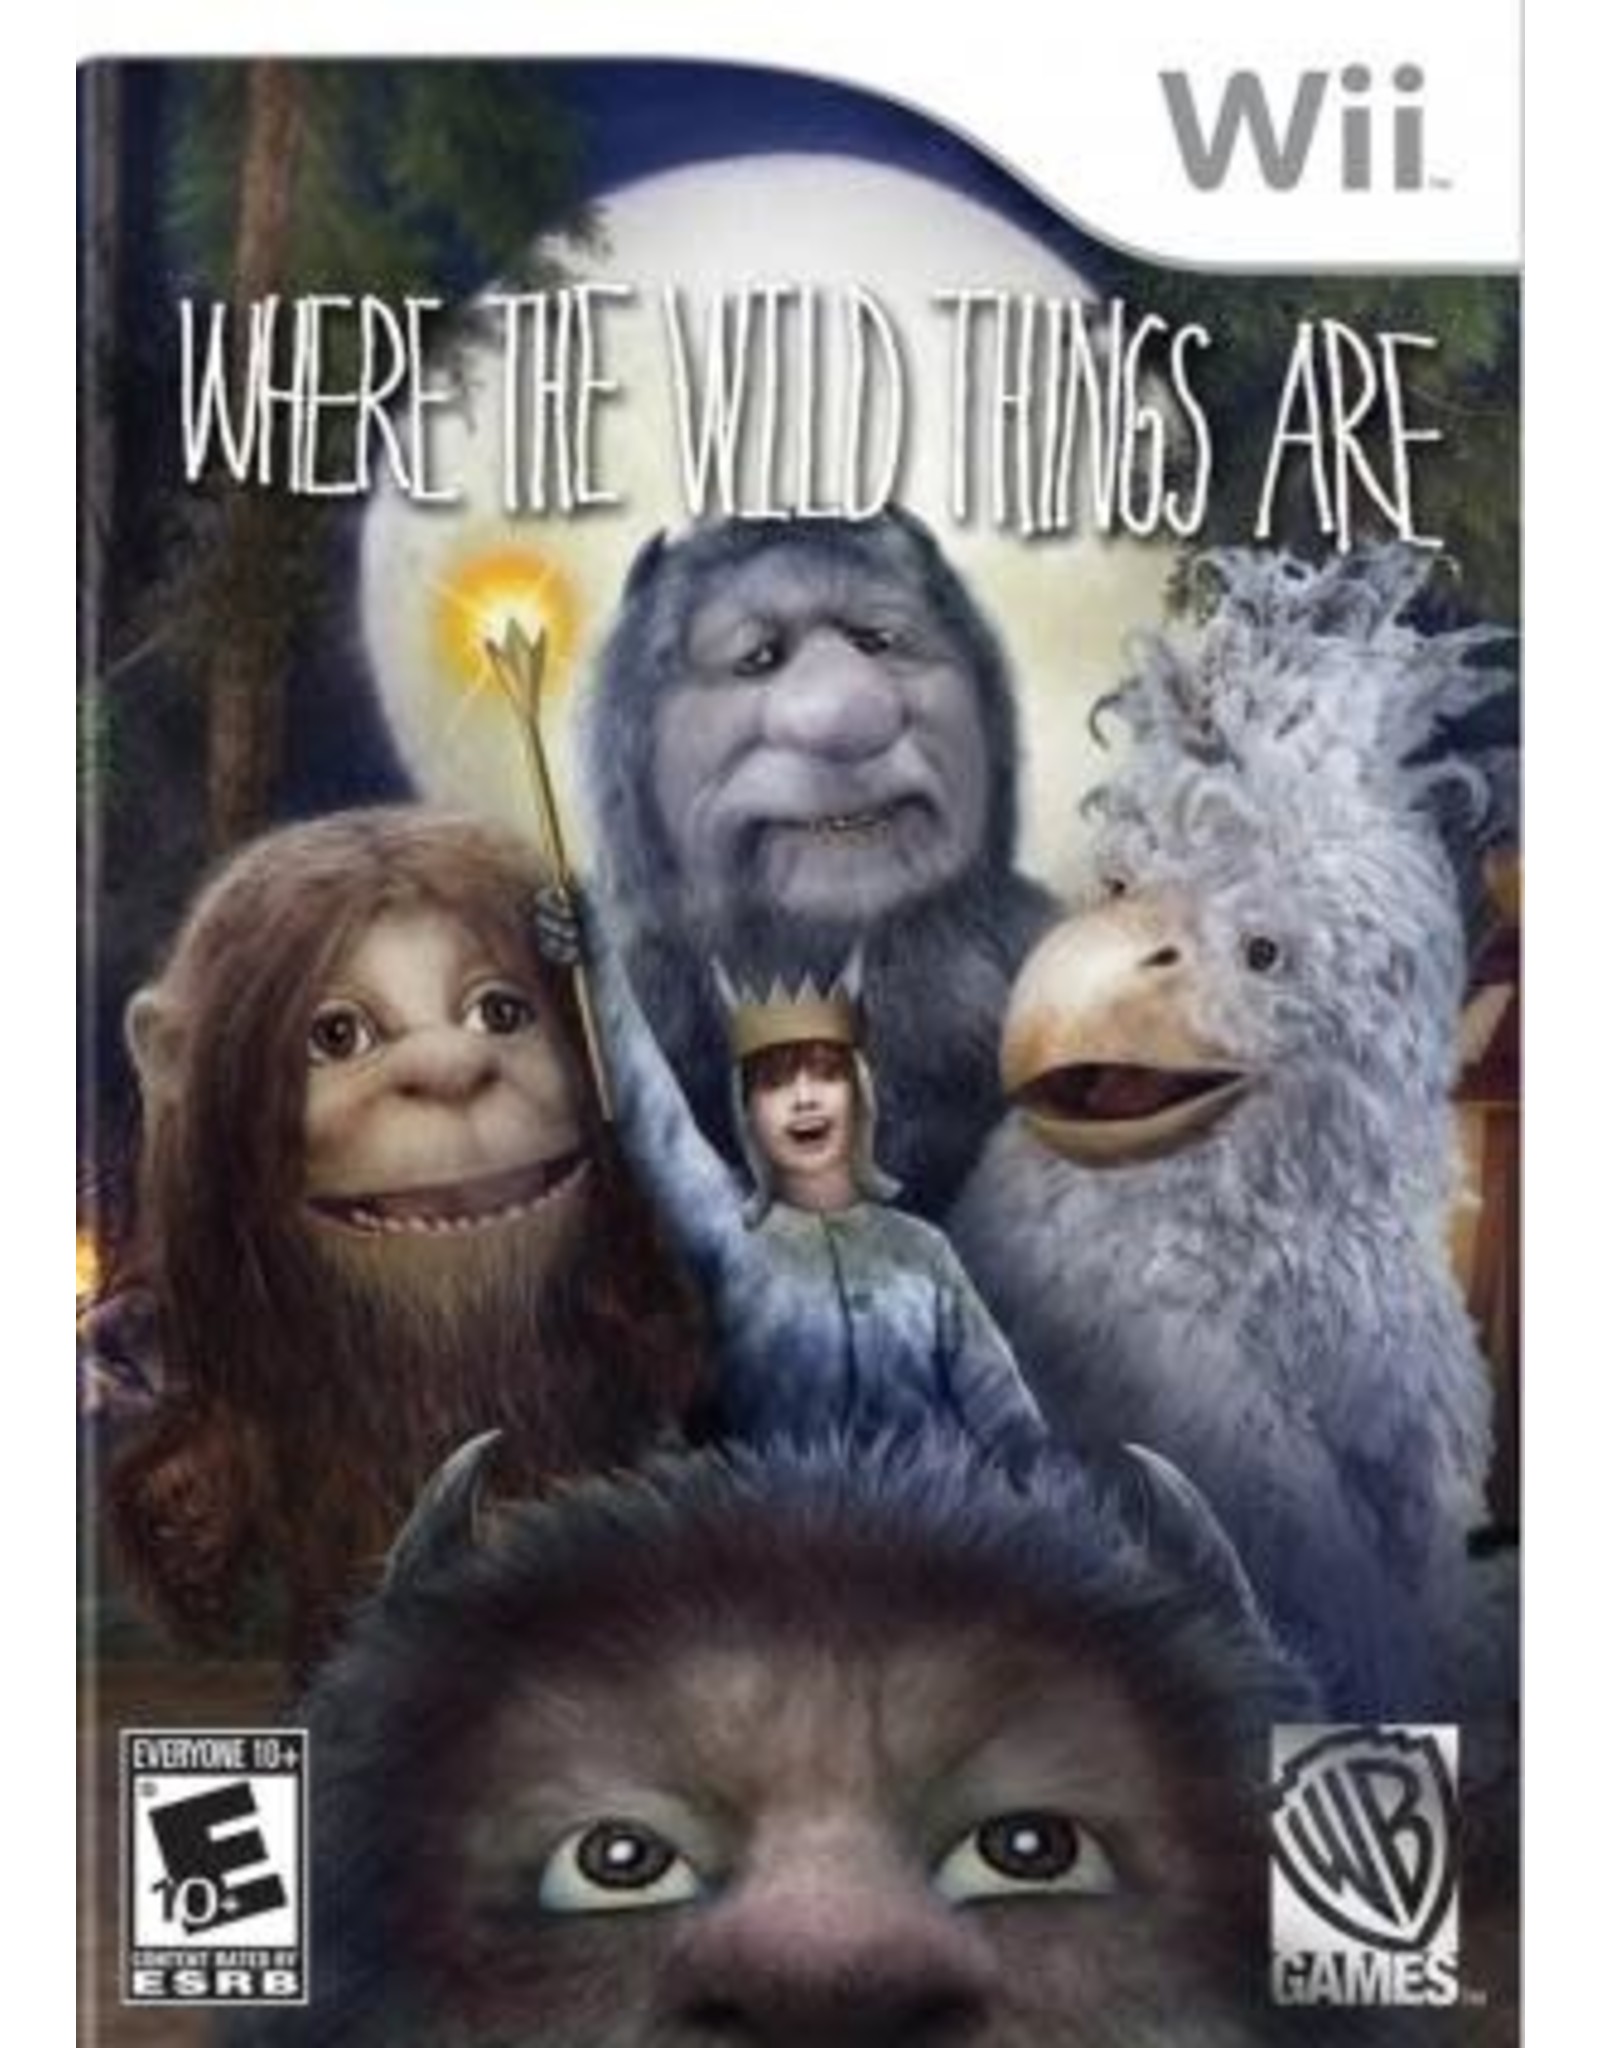 Wii Where the Wild Things Are (CiB)